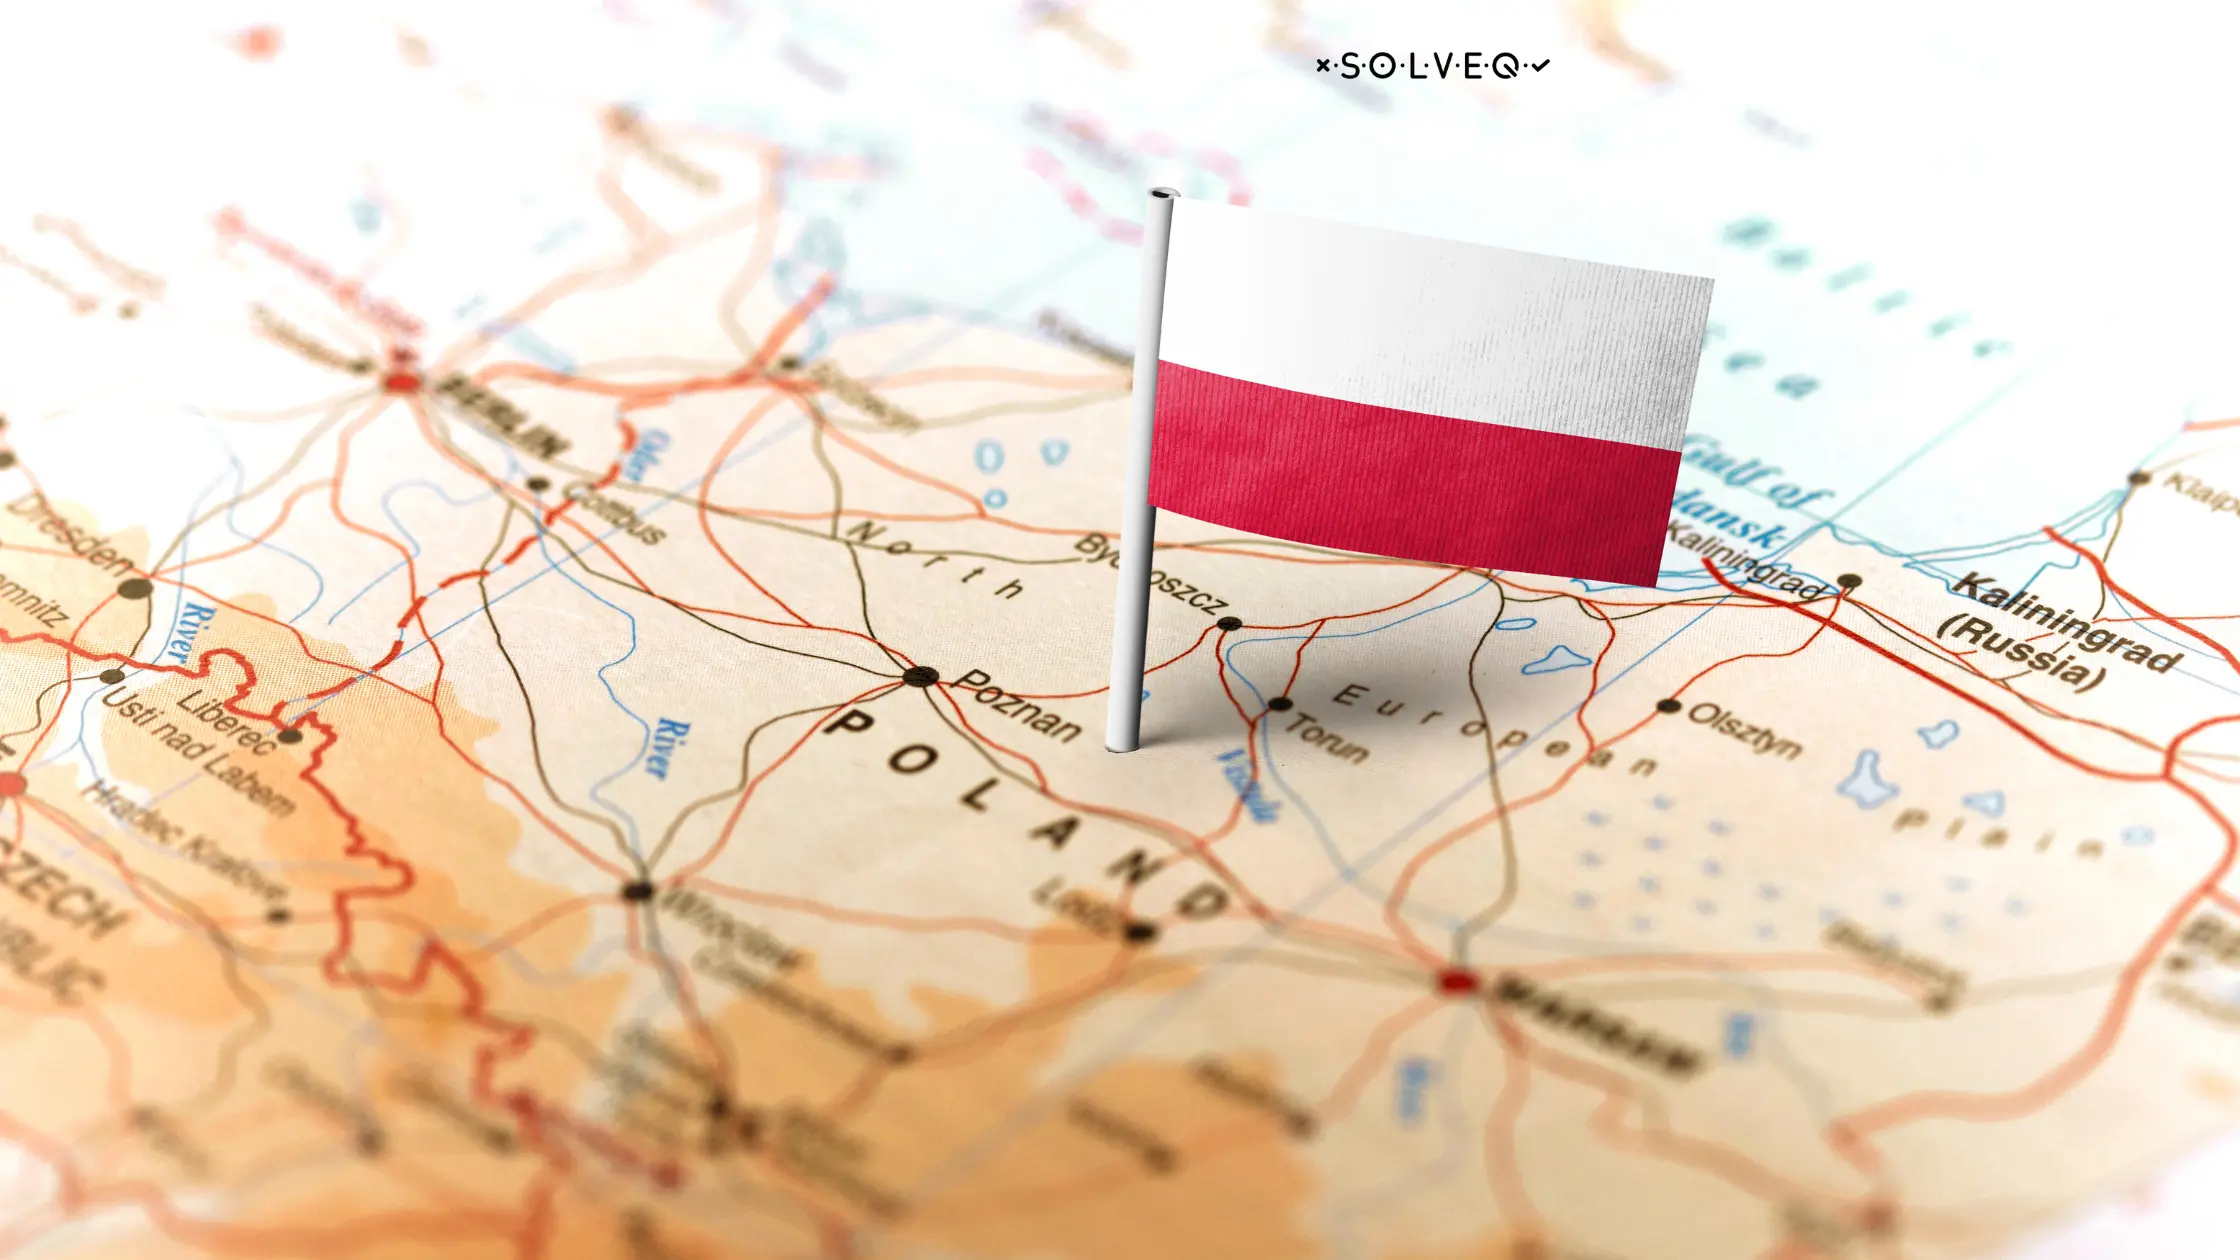 Why does Poland meet all of your outsourcing needs?